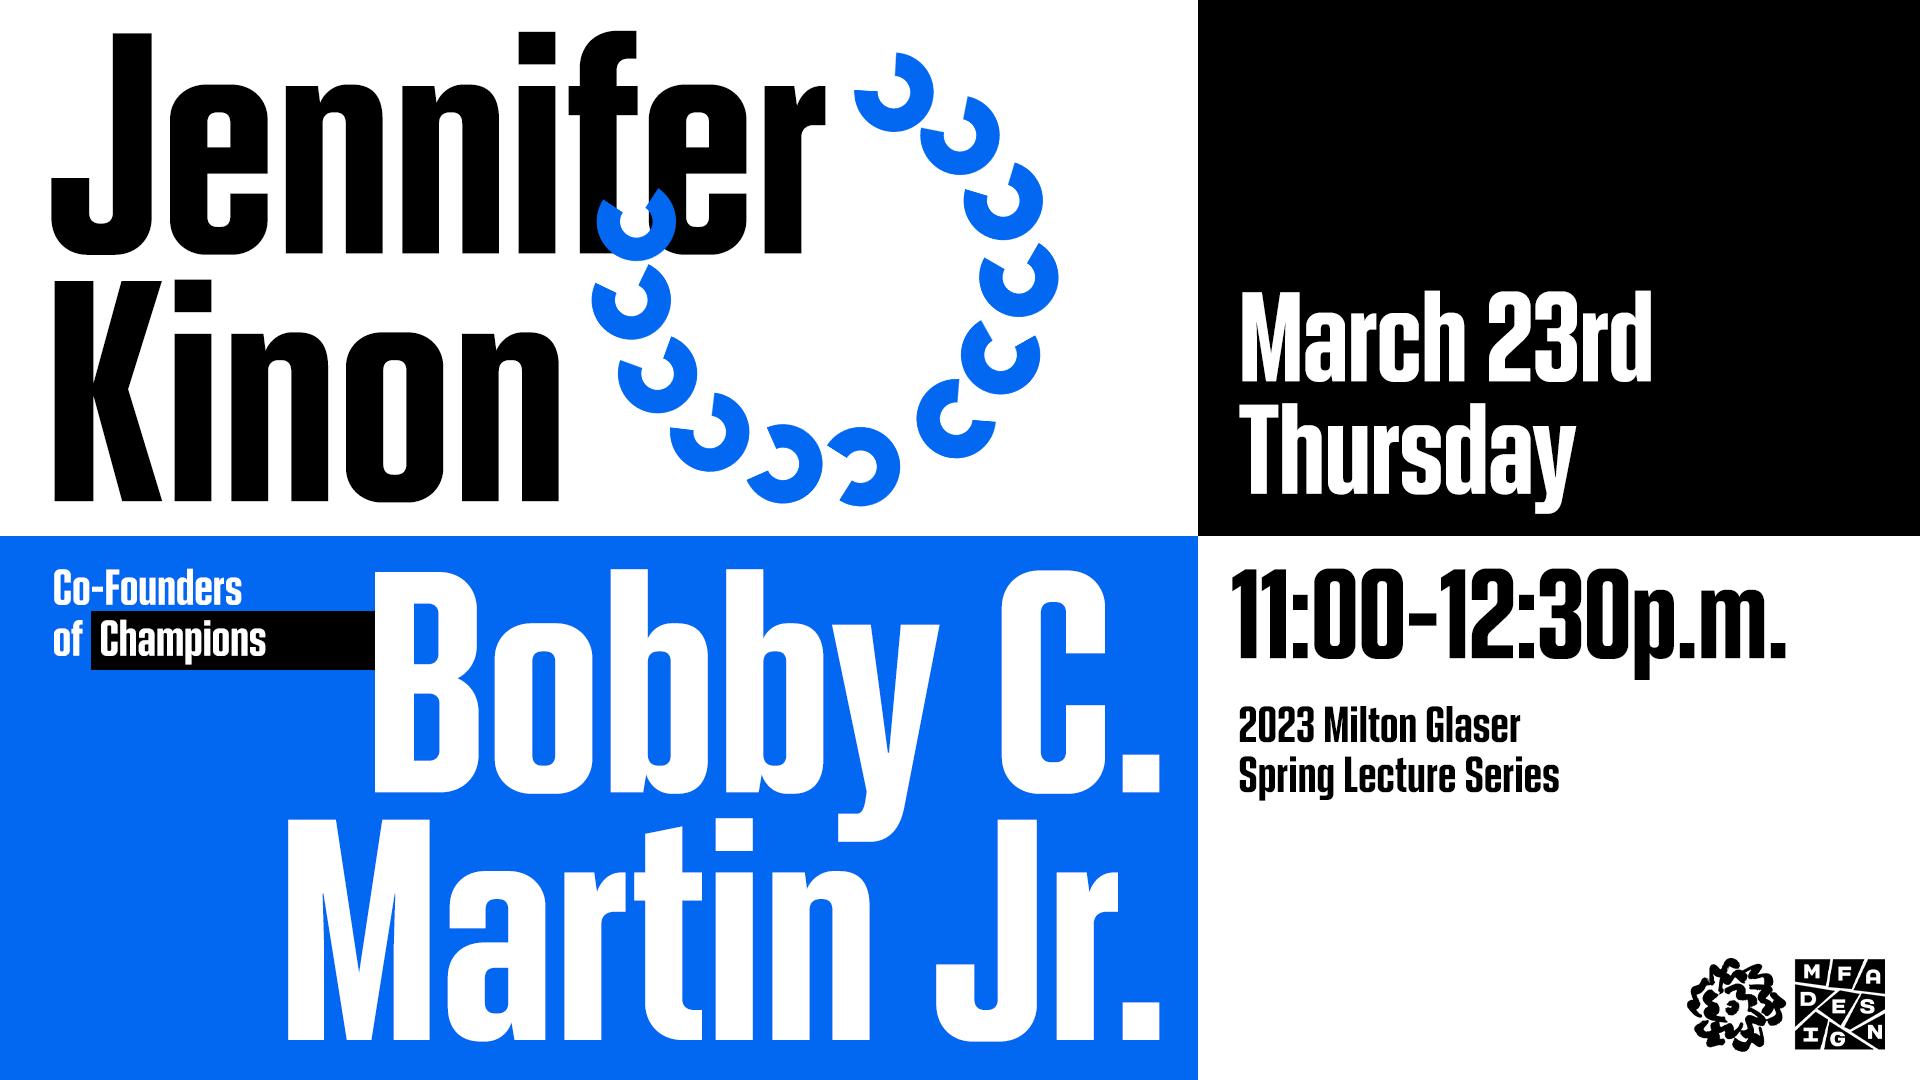 blue and black poster announcing Jennifer and Bobby guest lecture